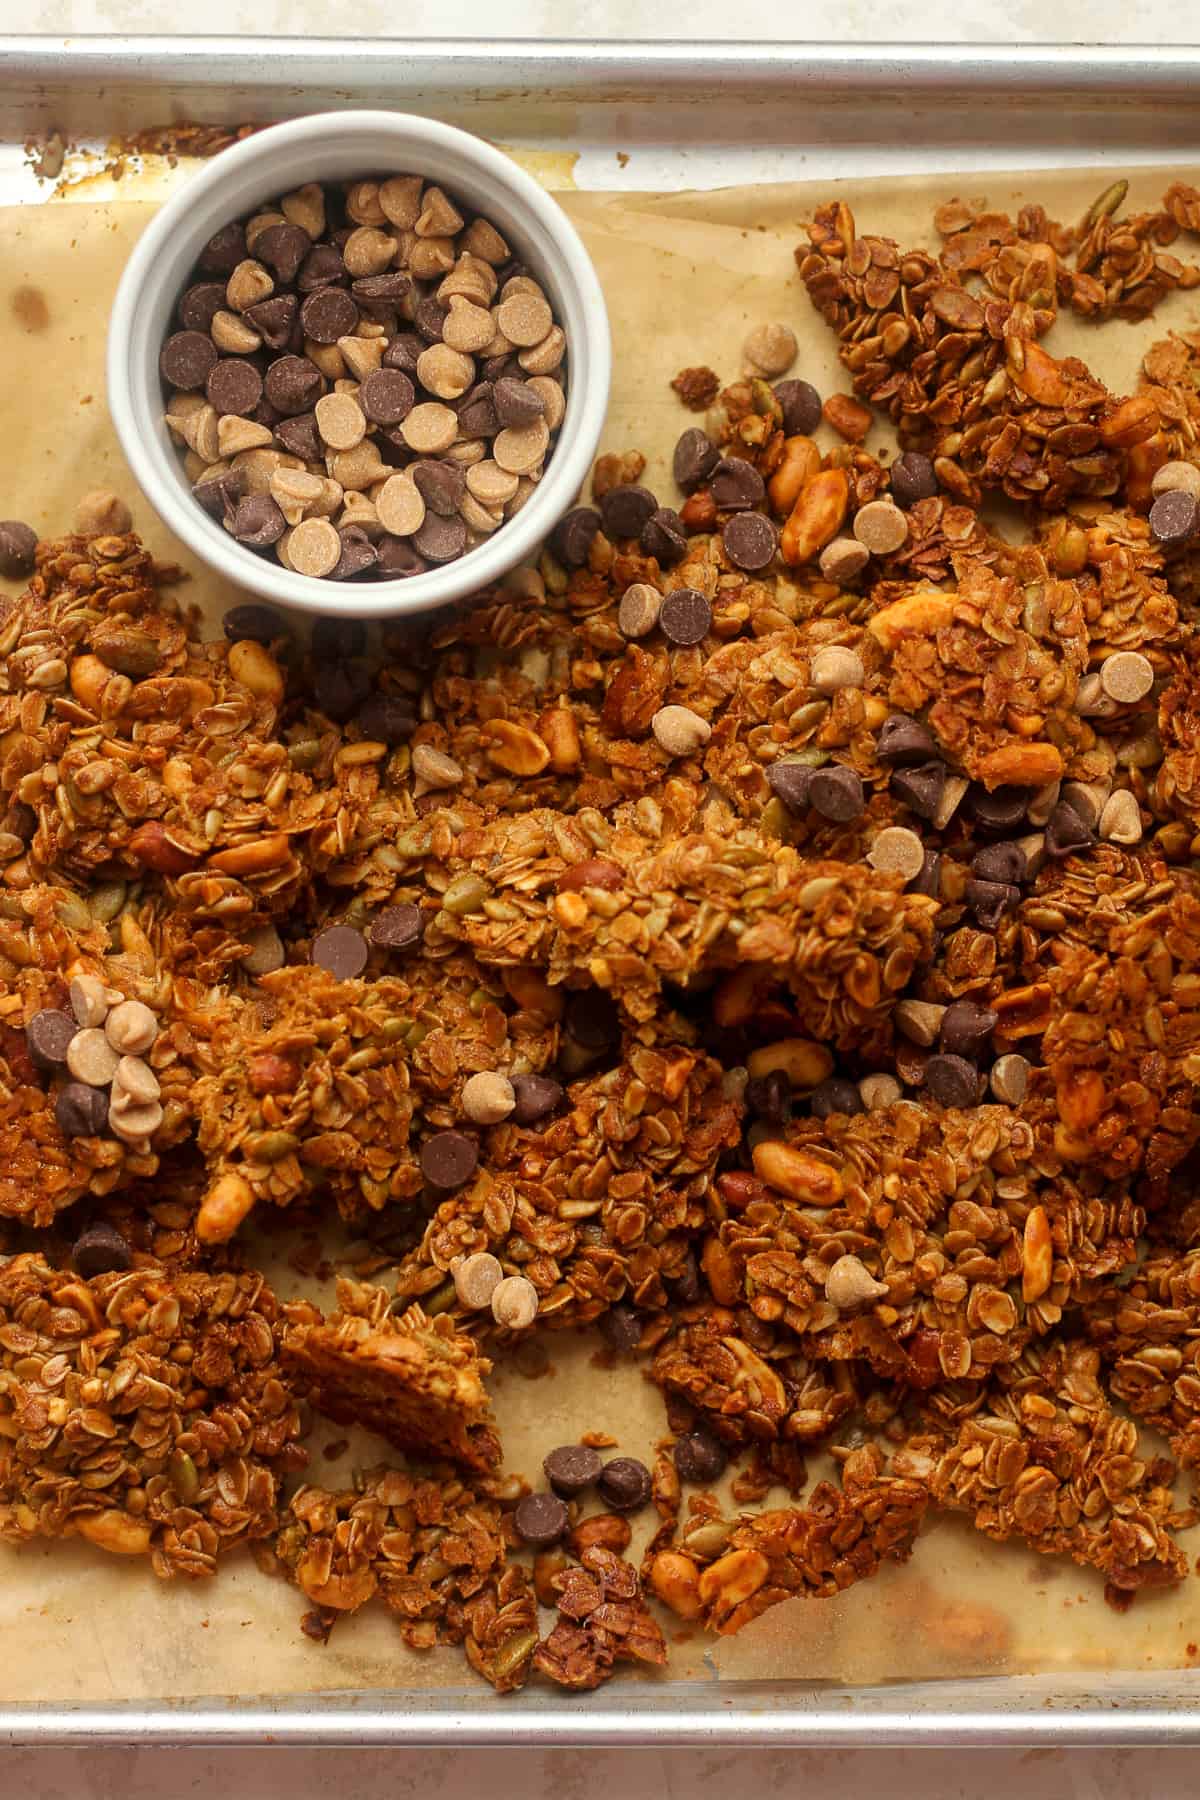 Overhead view of the granola clusters on a baking sheet with a small bowl of chips.